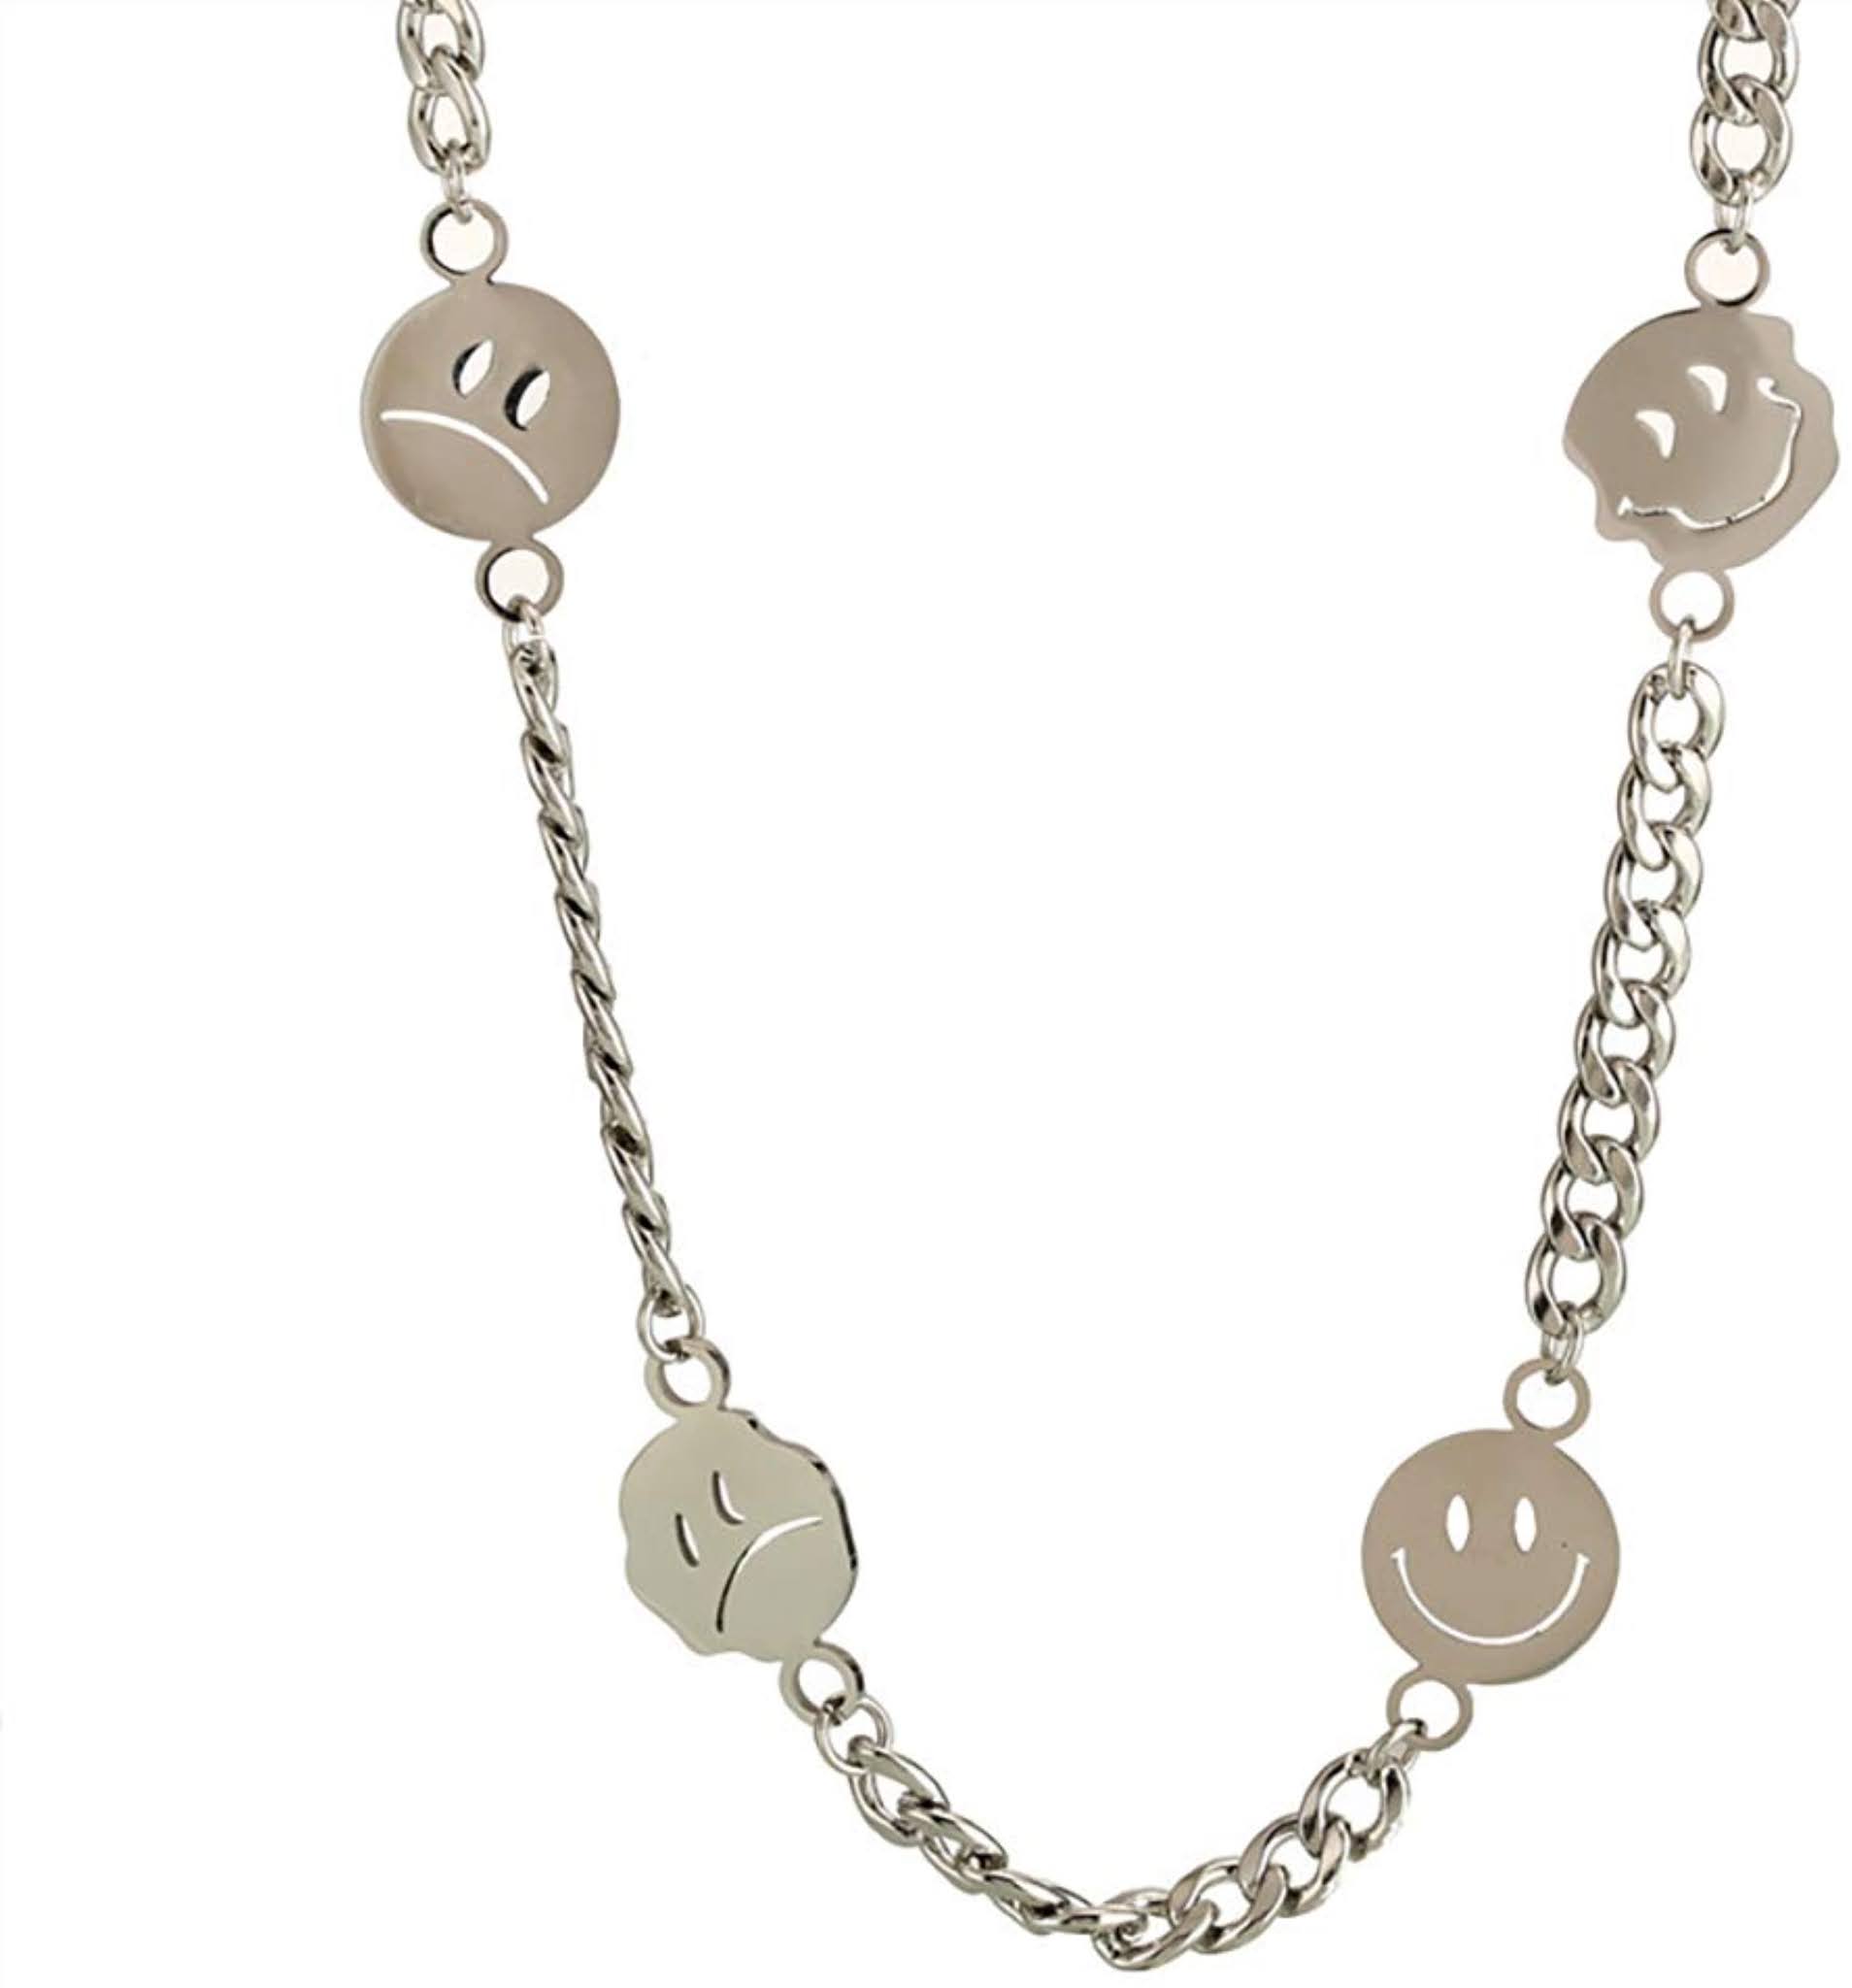 Smiley Chain Necklace Stainless Steel Punk Hip Hop Street Dance Rock Necklace for Men and Women